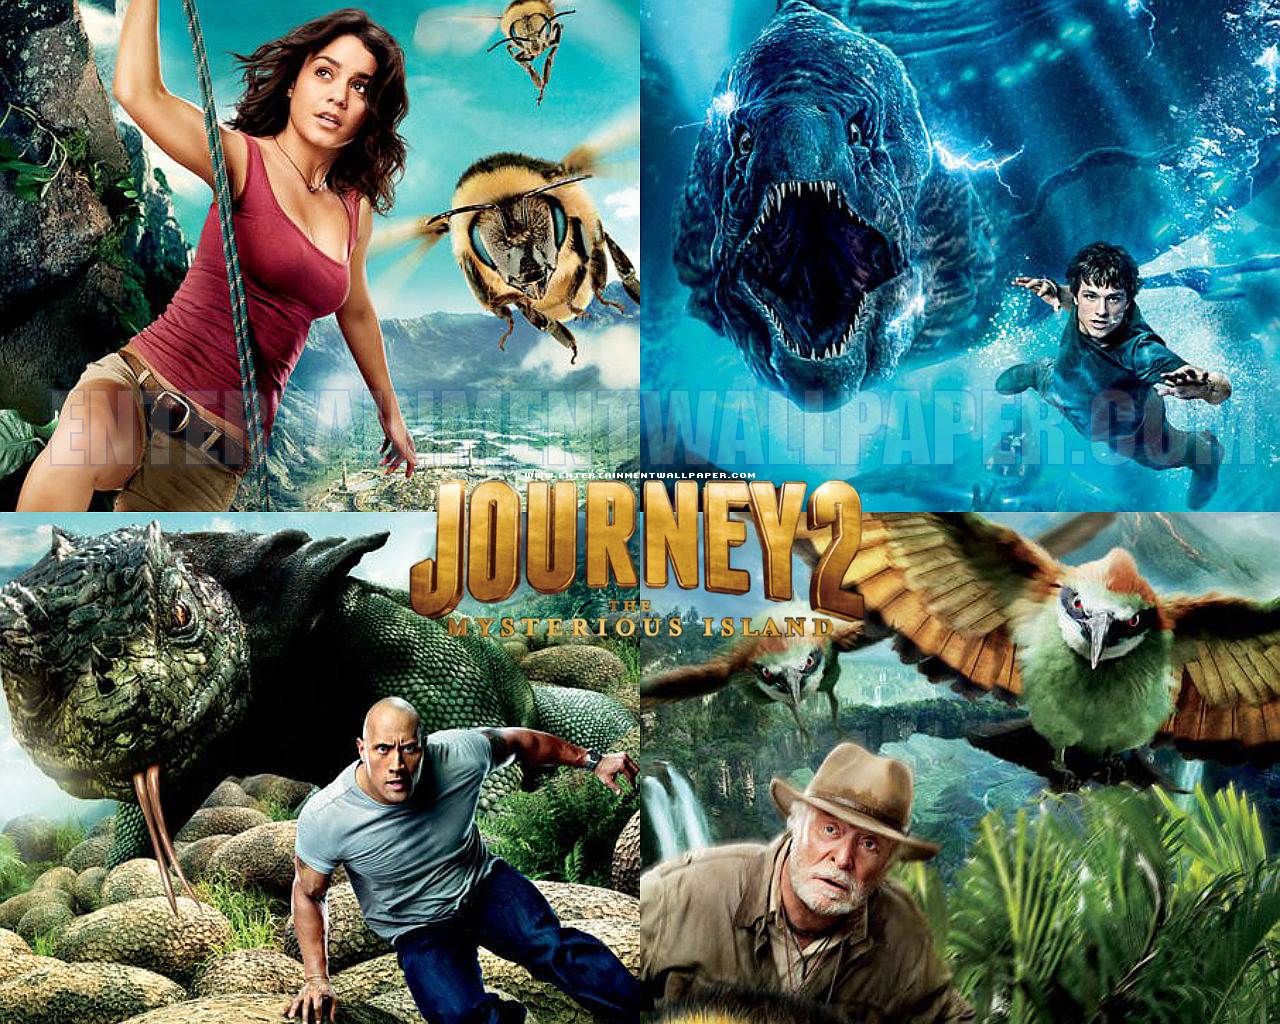 journey 2 mysterious island full movie in hindi